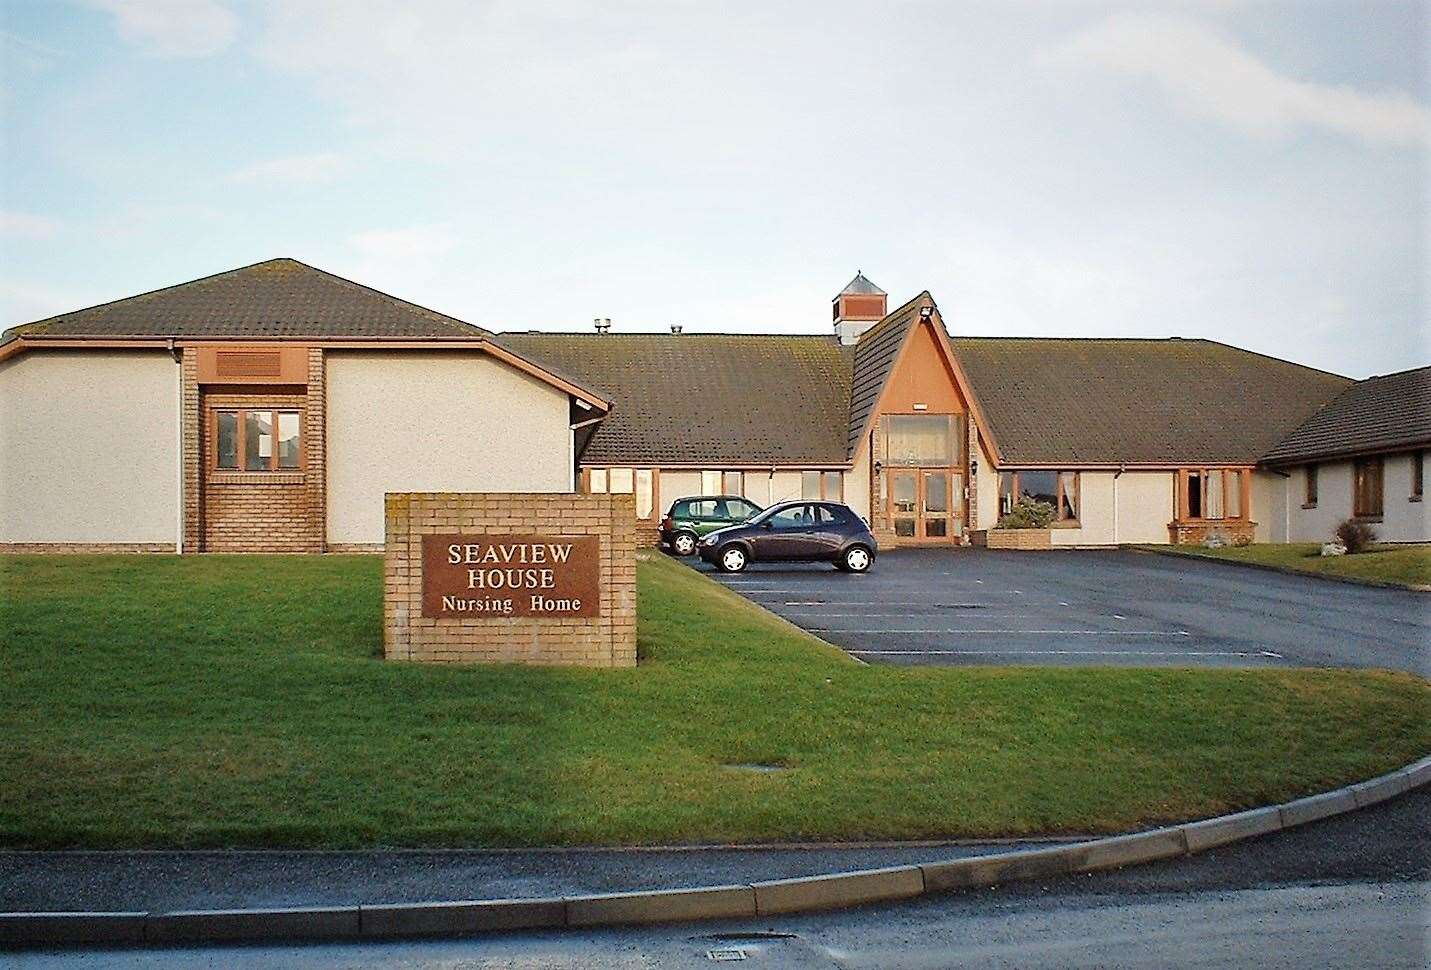 Seaview House care home in Wick.